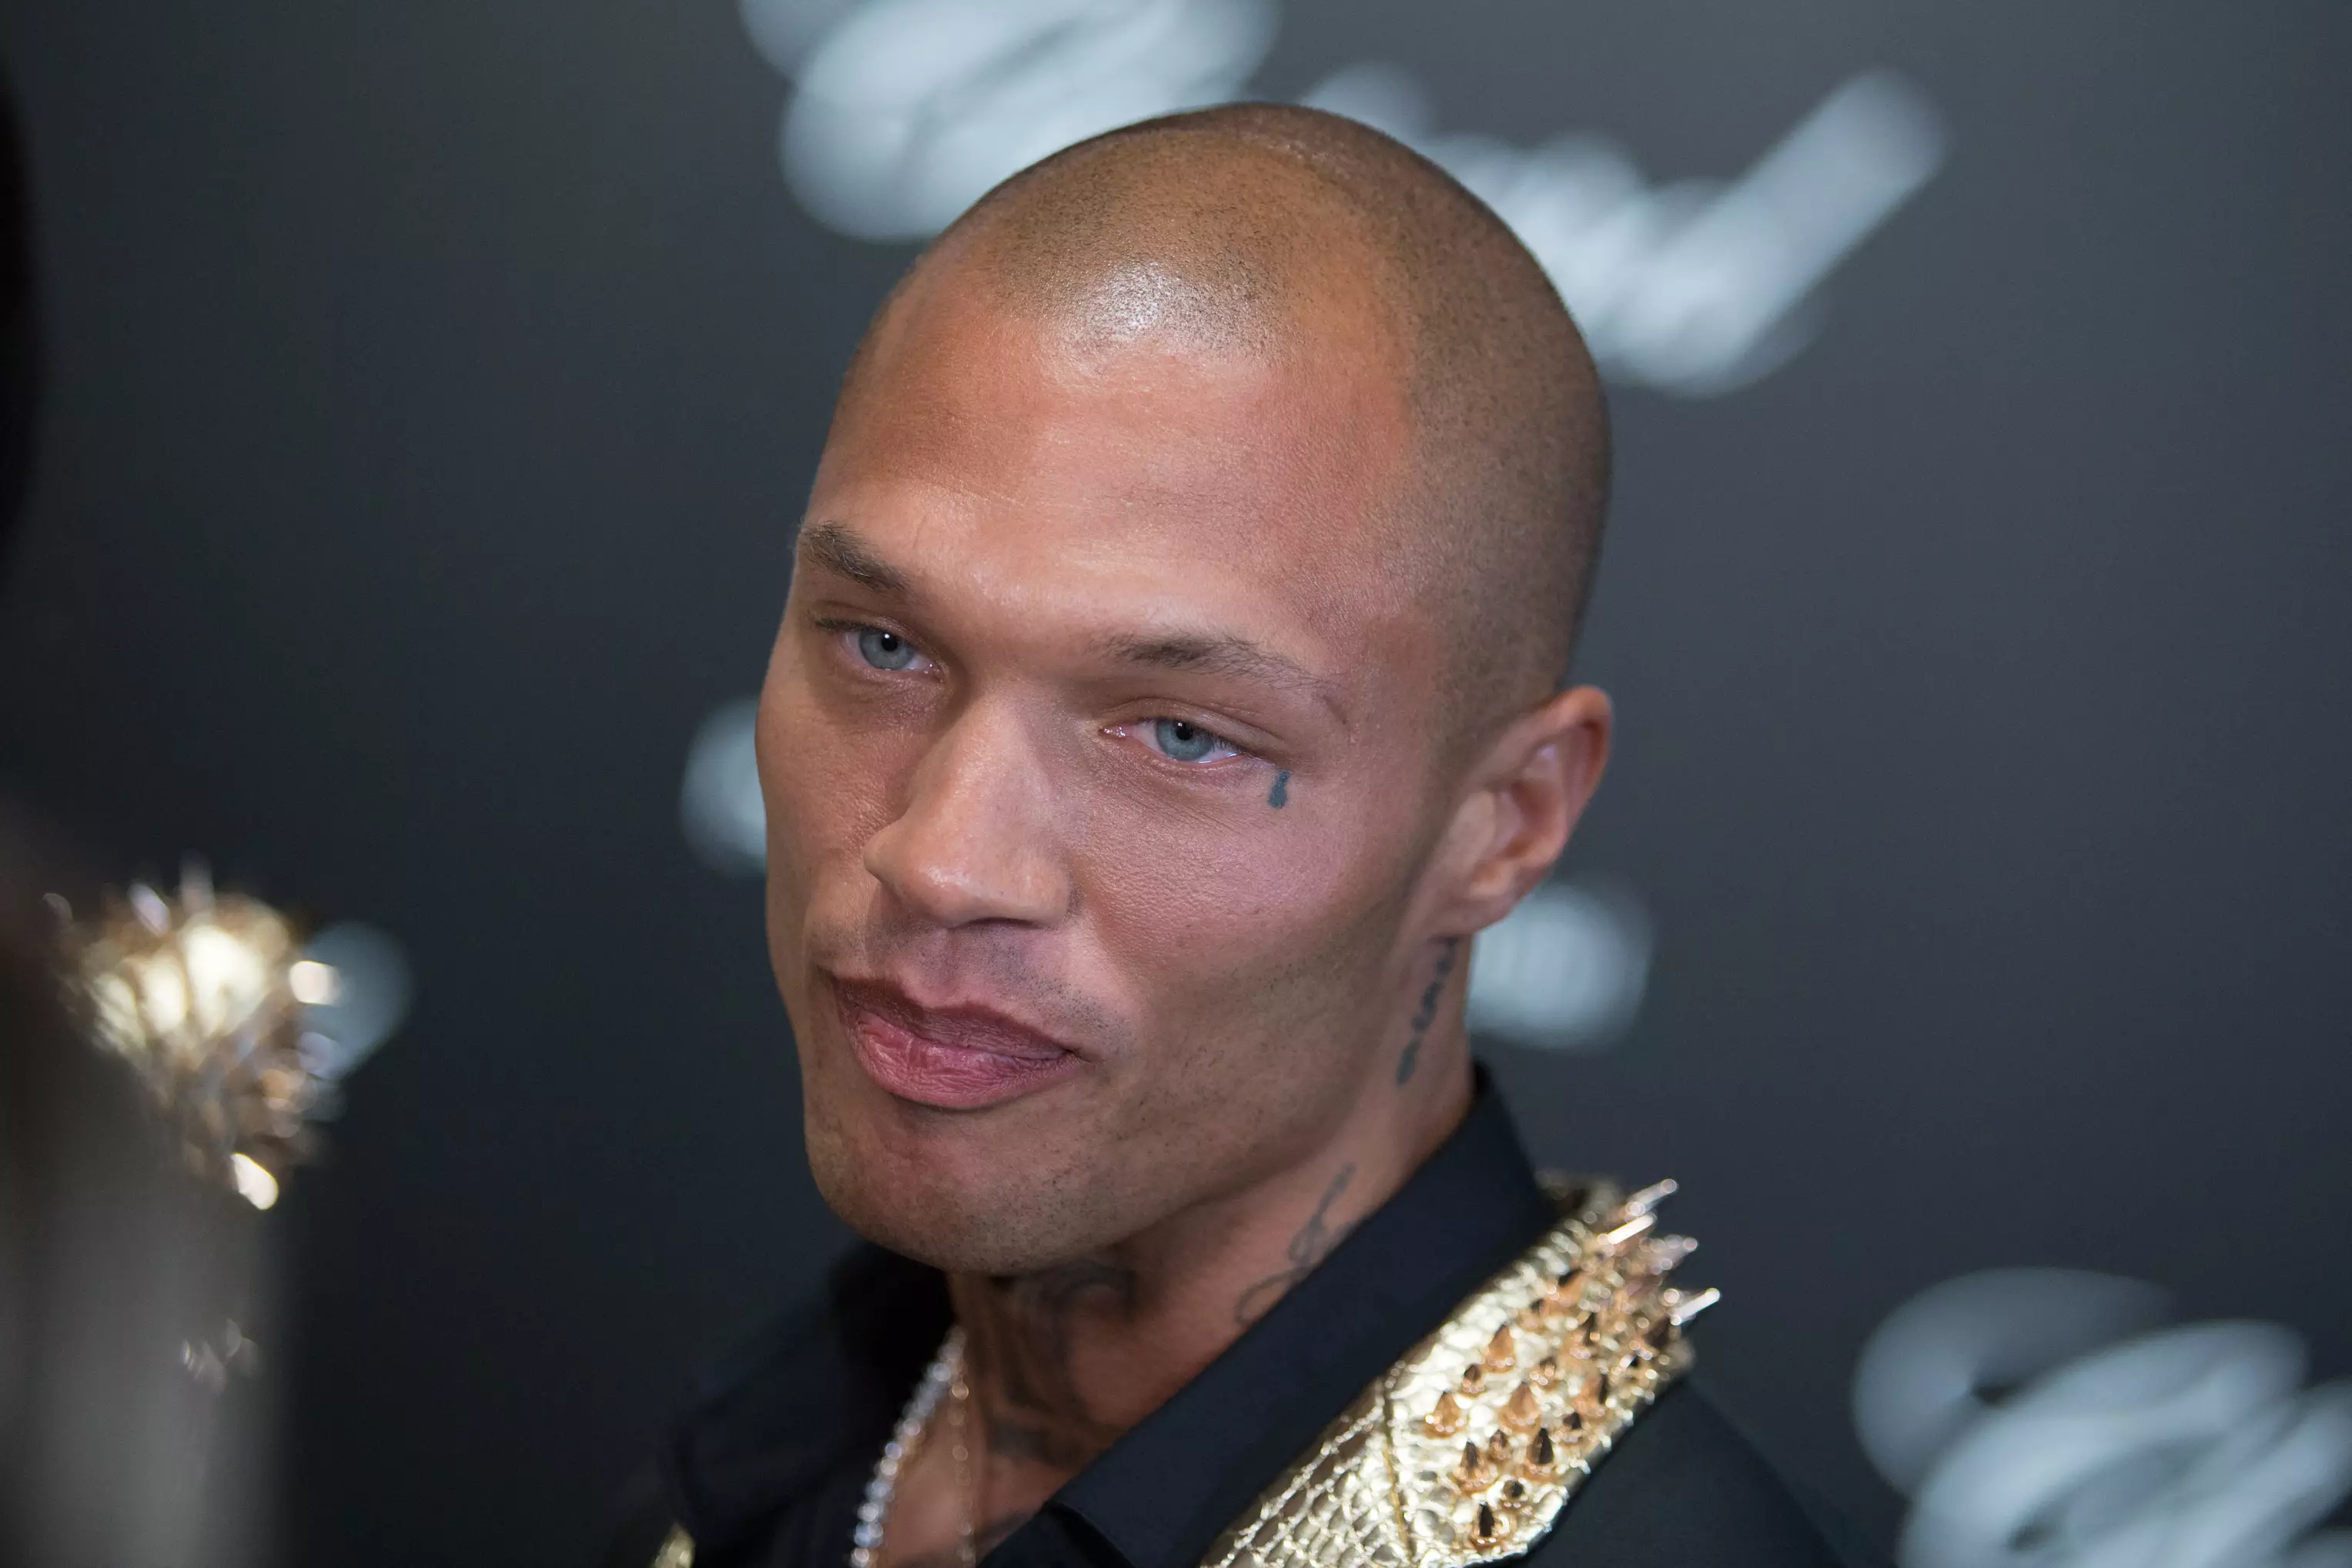 Unless you're Jeremy Meeks, it could look dumb.